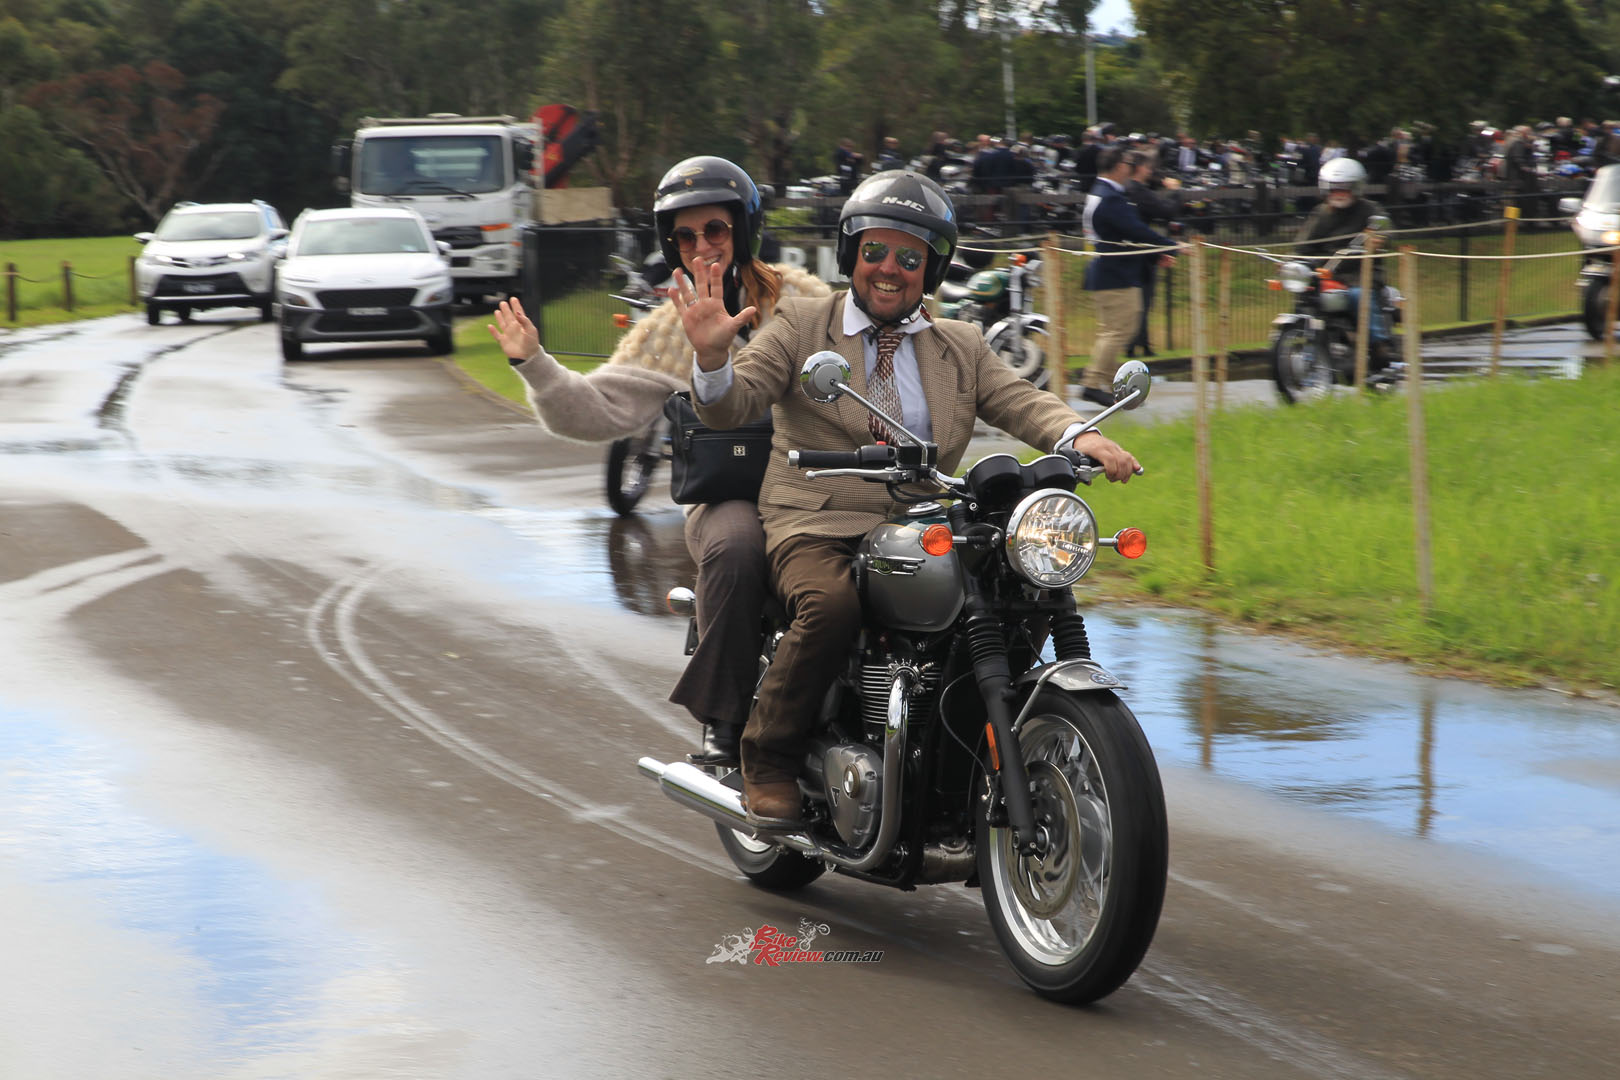 From the 223 riders registered for the Wollongong event, DGR raised a total of $159,588aud!